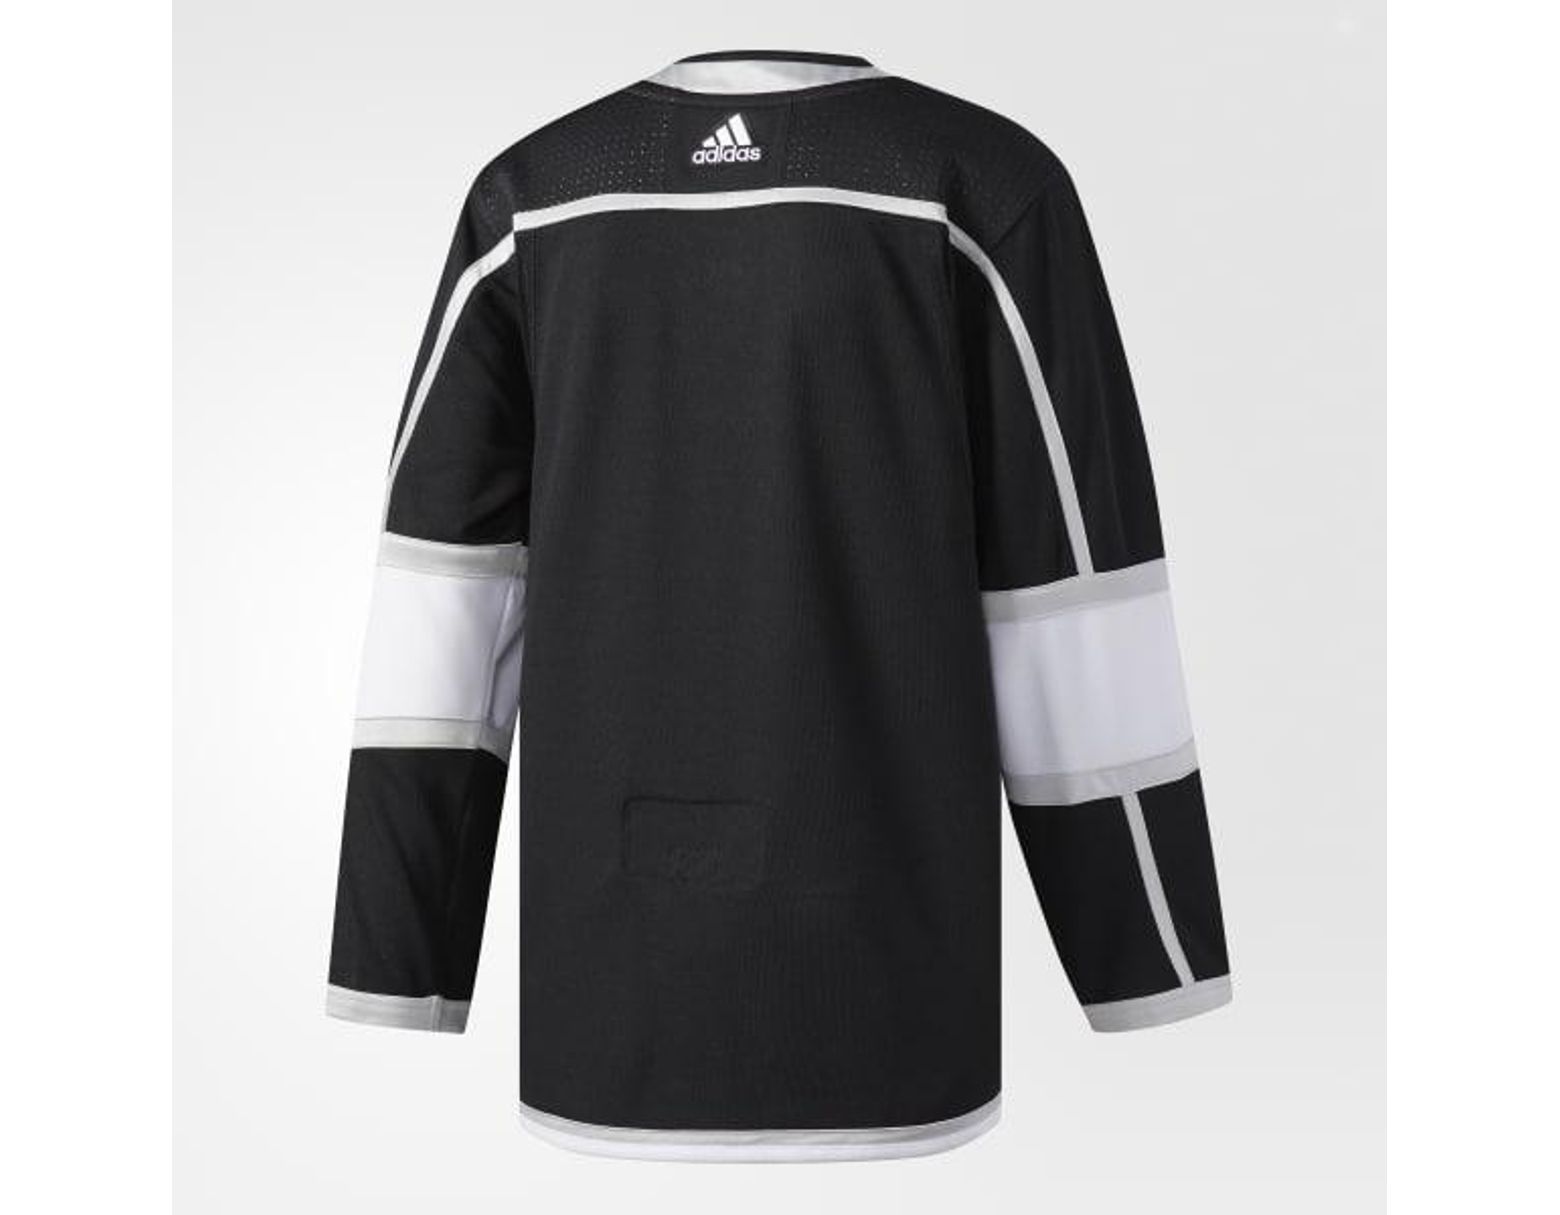 kings home jersey